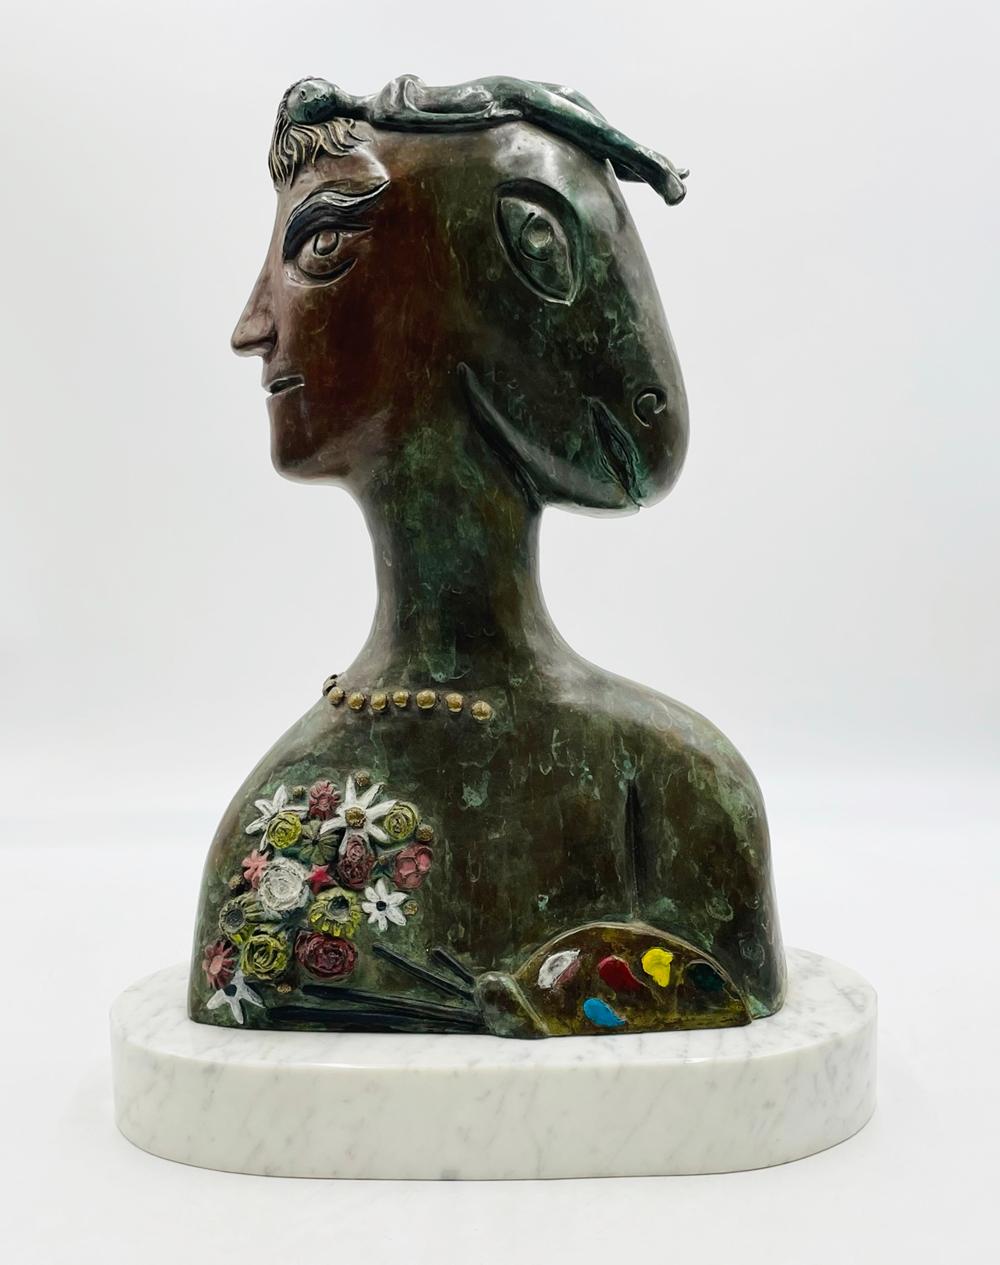 Introducing the exquisite Bronze Sculpture by Robert St. Croix, an awe-inspiring Homage to Chagall. This remarkable piece, signed and numbered 2/75, is dated 1988, making it a true testament to the artist's undeniable talent and timeless